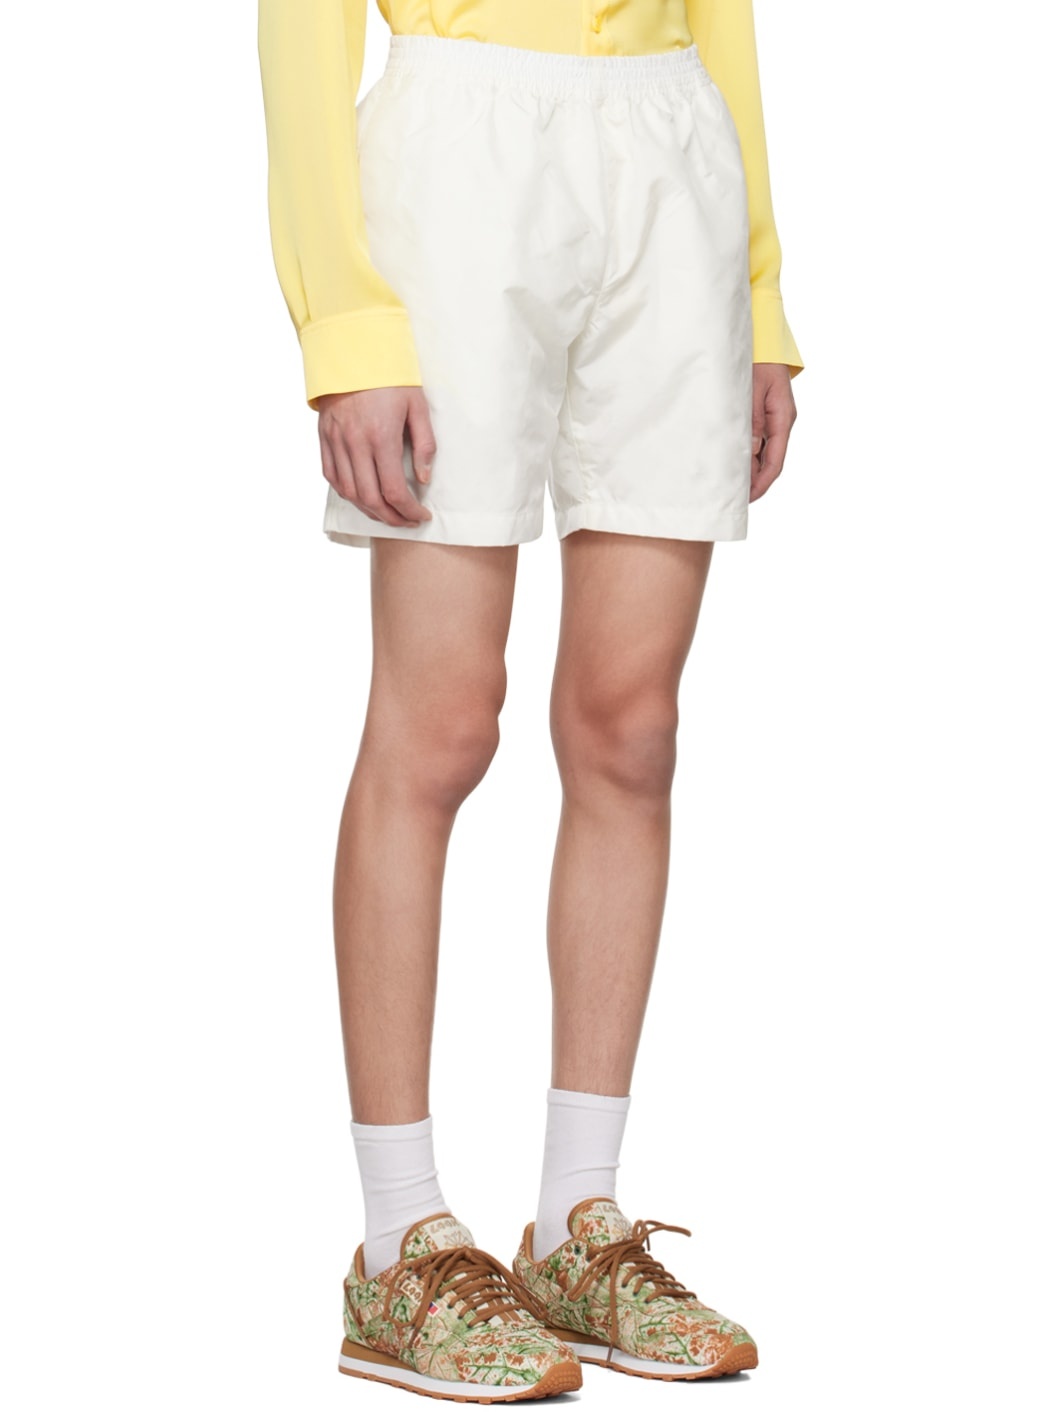 Off-White Airbag Shorts - 2